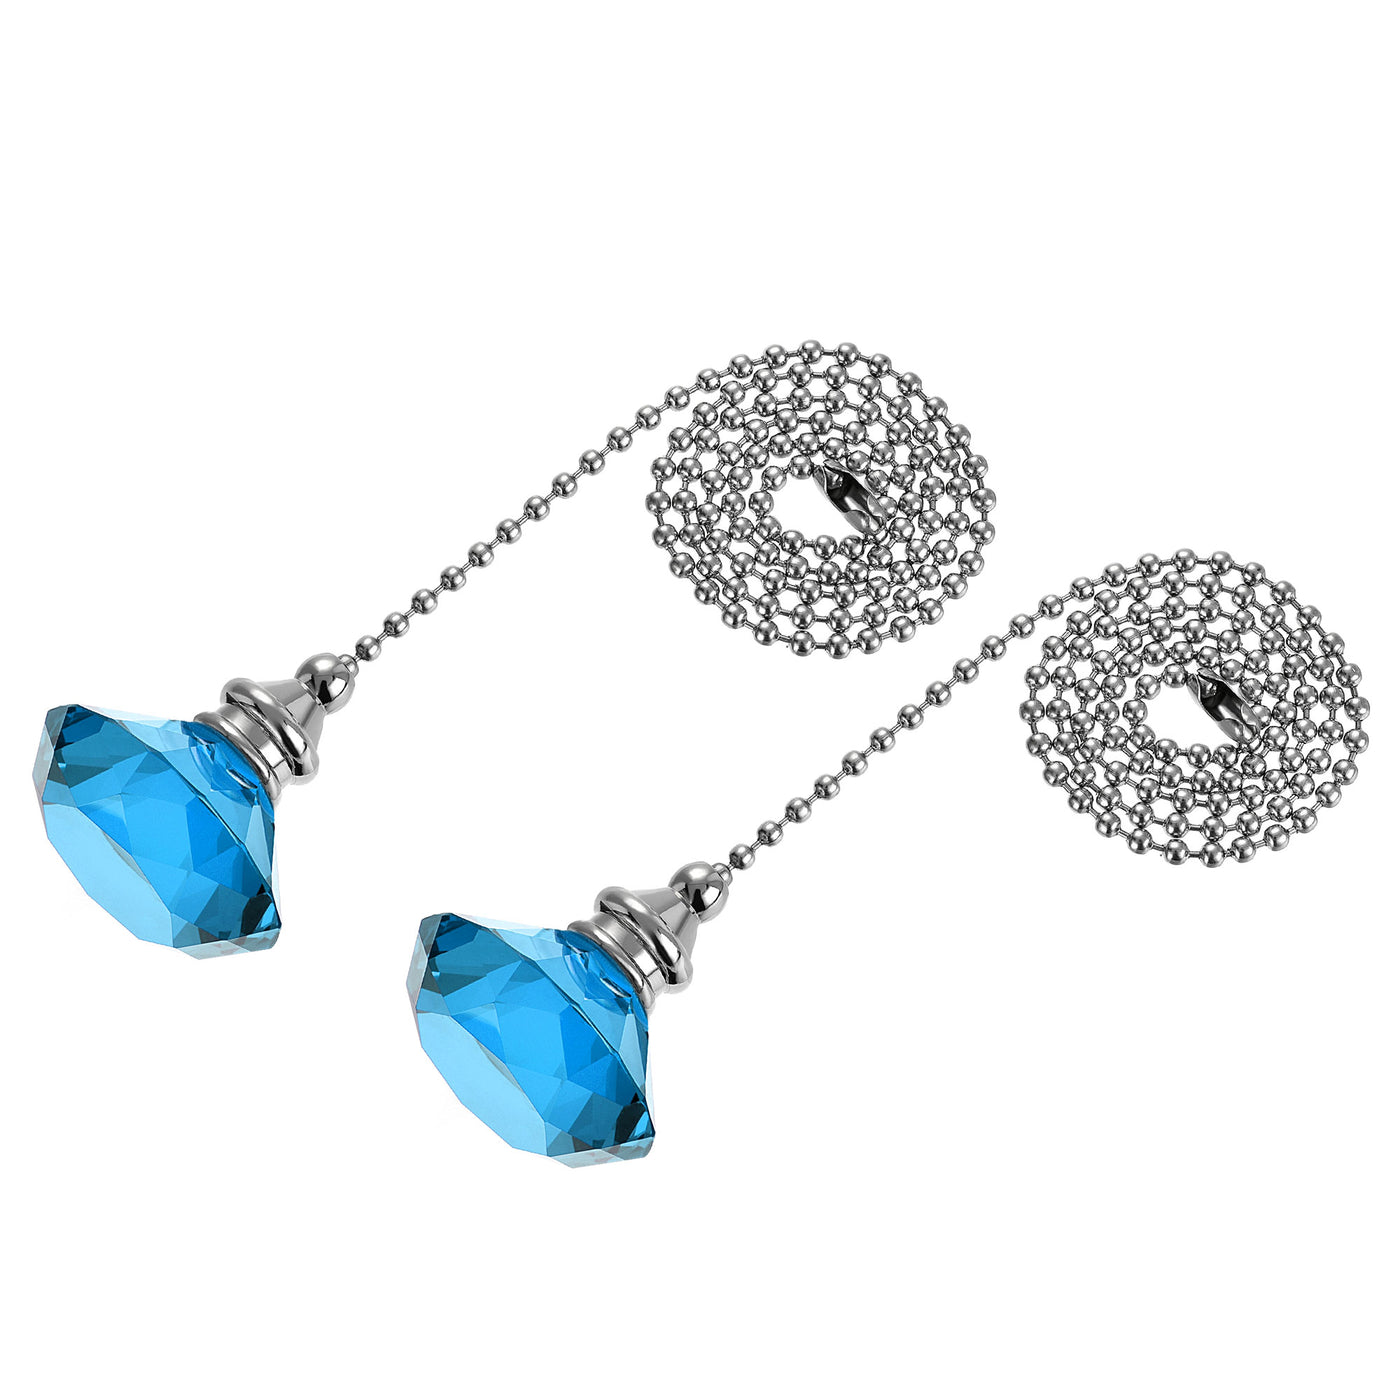 uxcell Uxcell 20 Inch Ceiling Fan Pull Chain, Decorative Crystal Fan Pull Chain Ornament Extension, 3mm Diameter Beaded Diamond Pendant, Light Blue 2Pcs